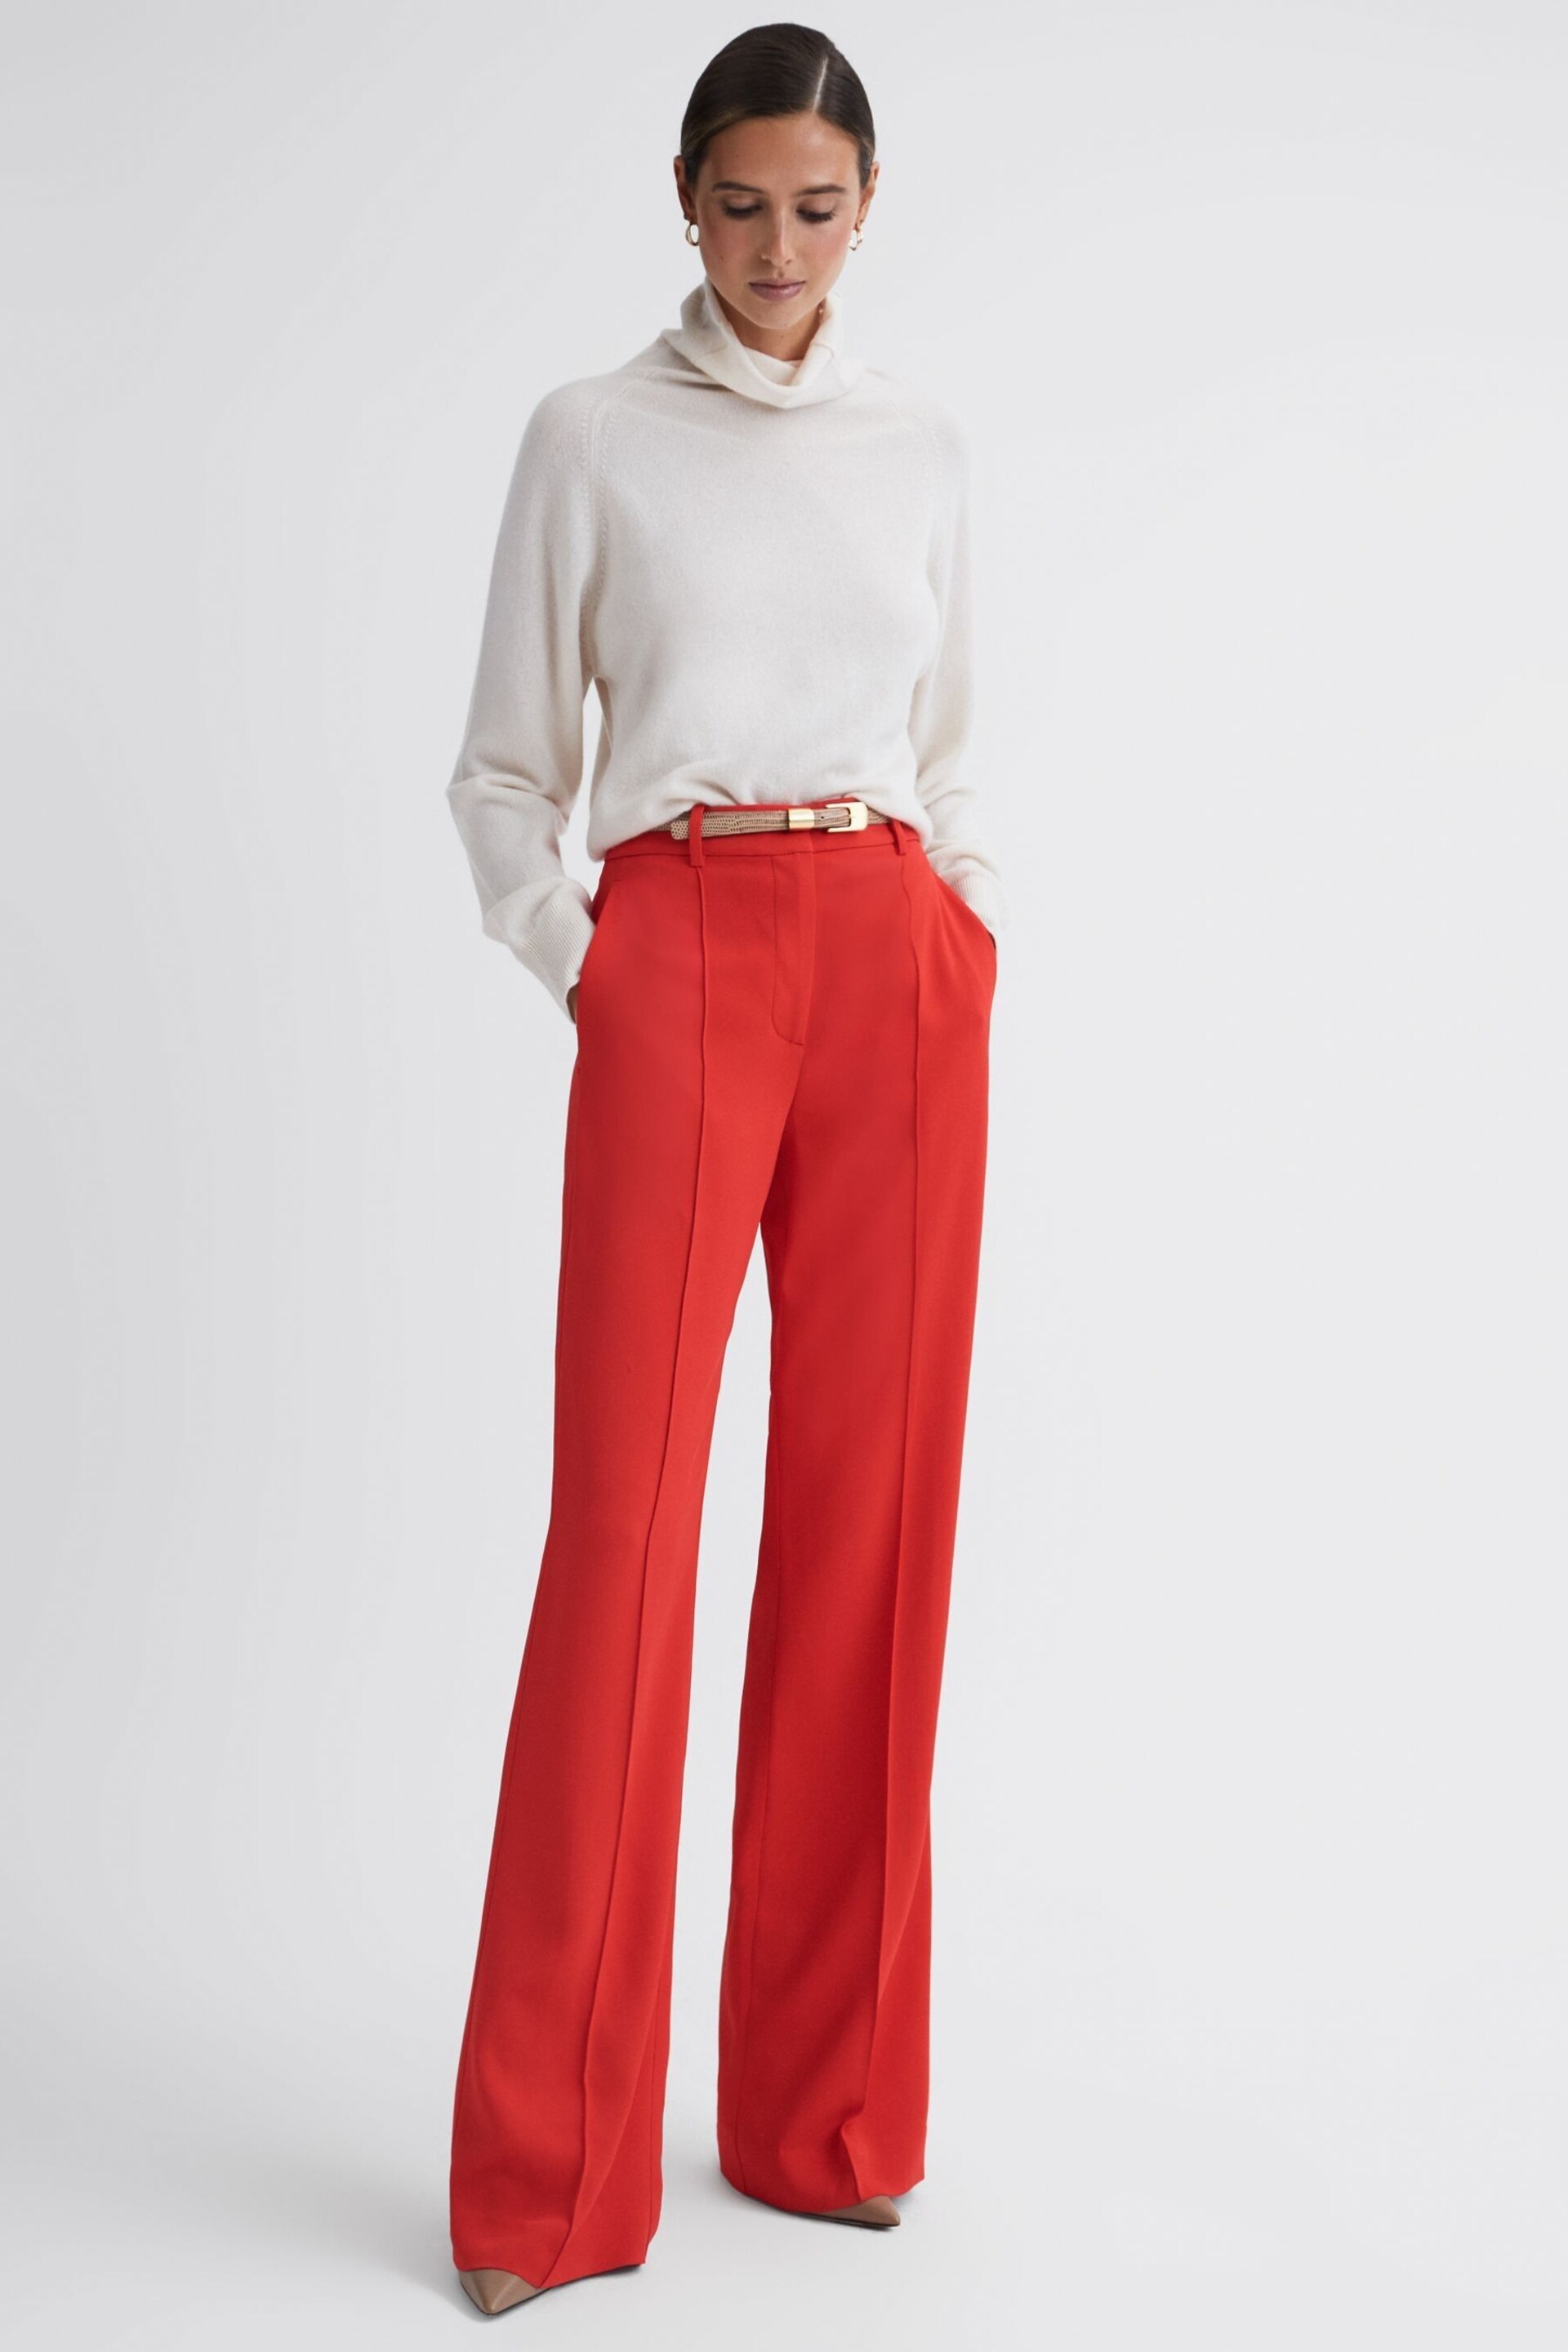 Reiss Coral Cara Wide Leg Mid Rise Trousers - Image 4 of 5